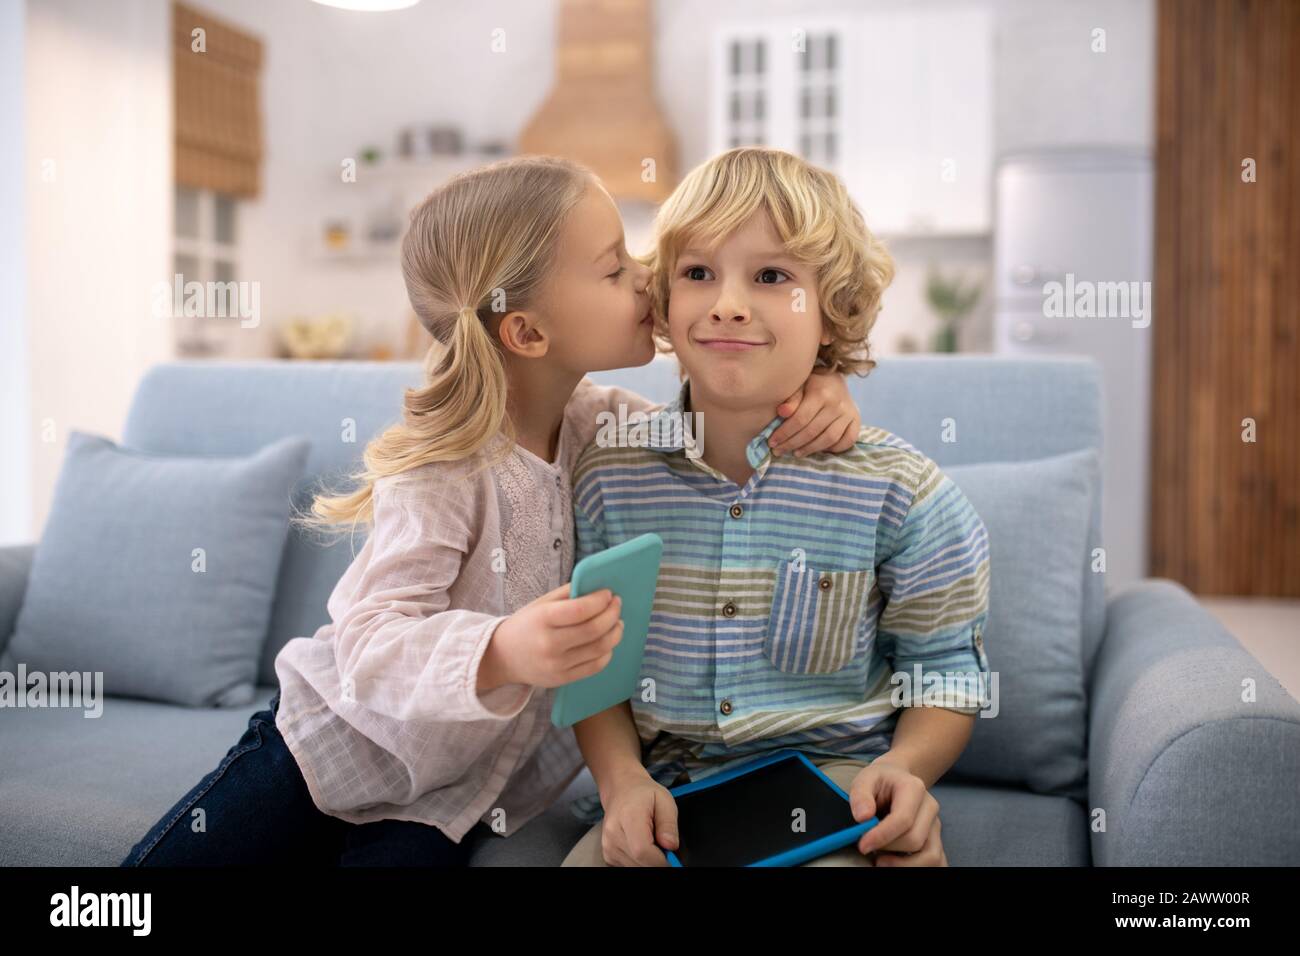 Blond girl holding smartphone and kissing boy Stock Photo